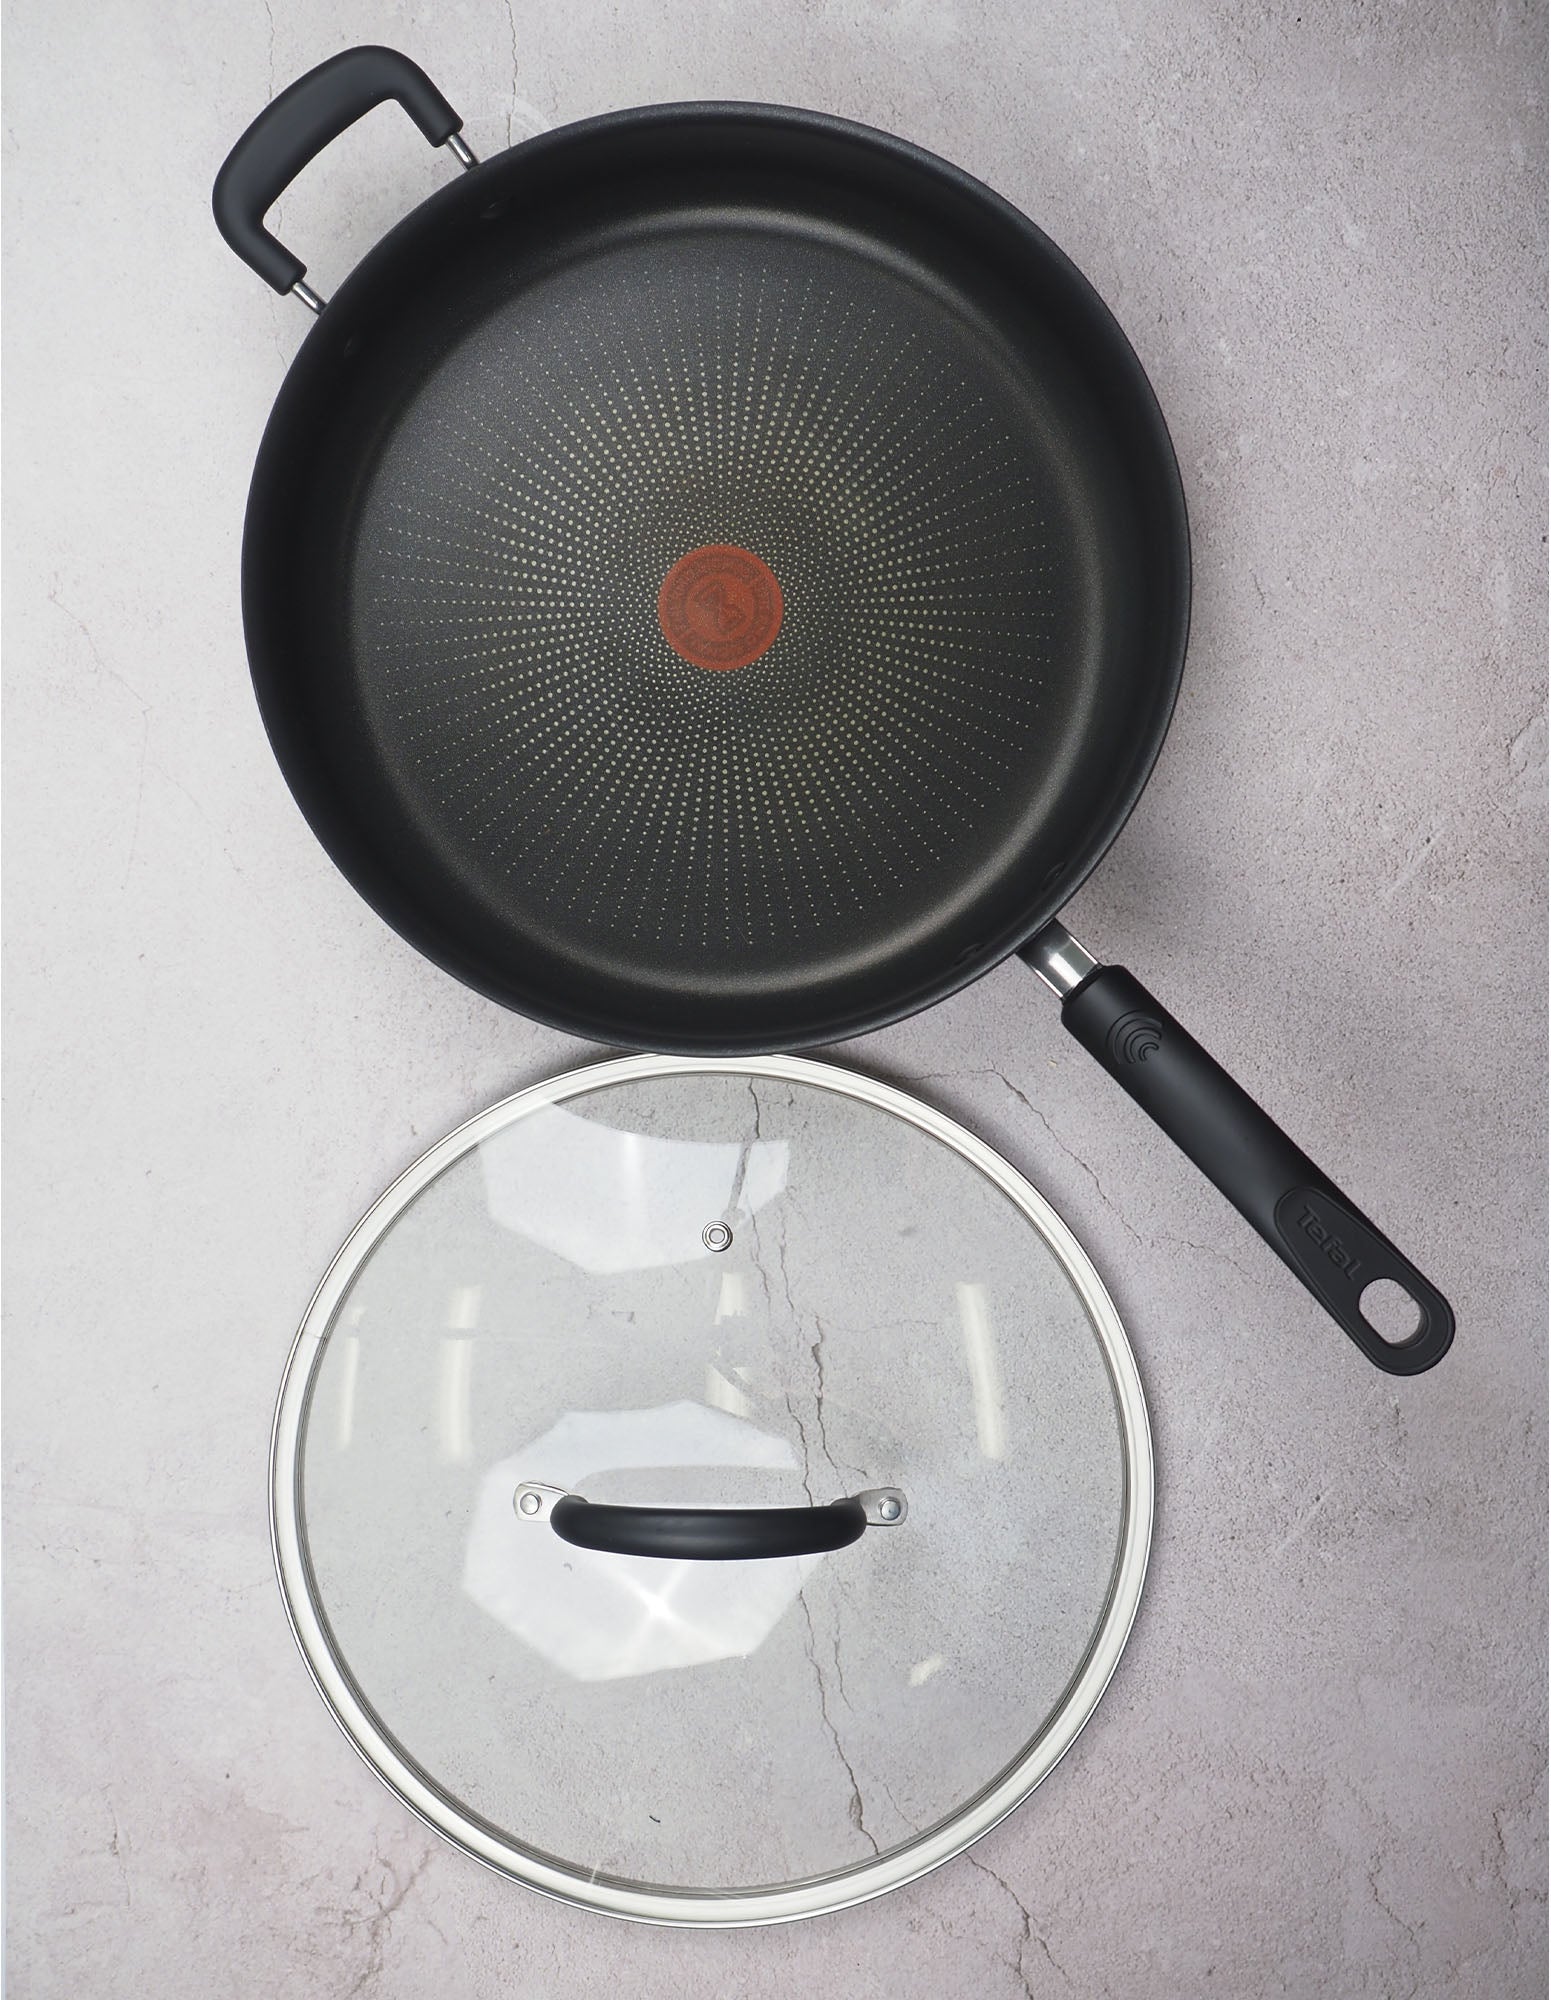 Tefal Specialty Hard Anodised Non-Stick Sautepan 30cm + Lid